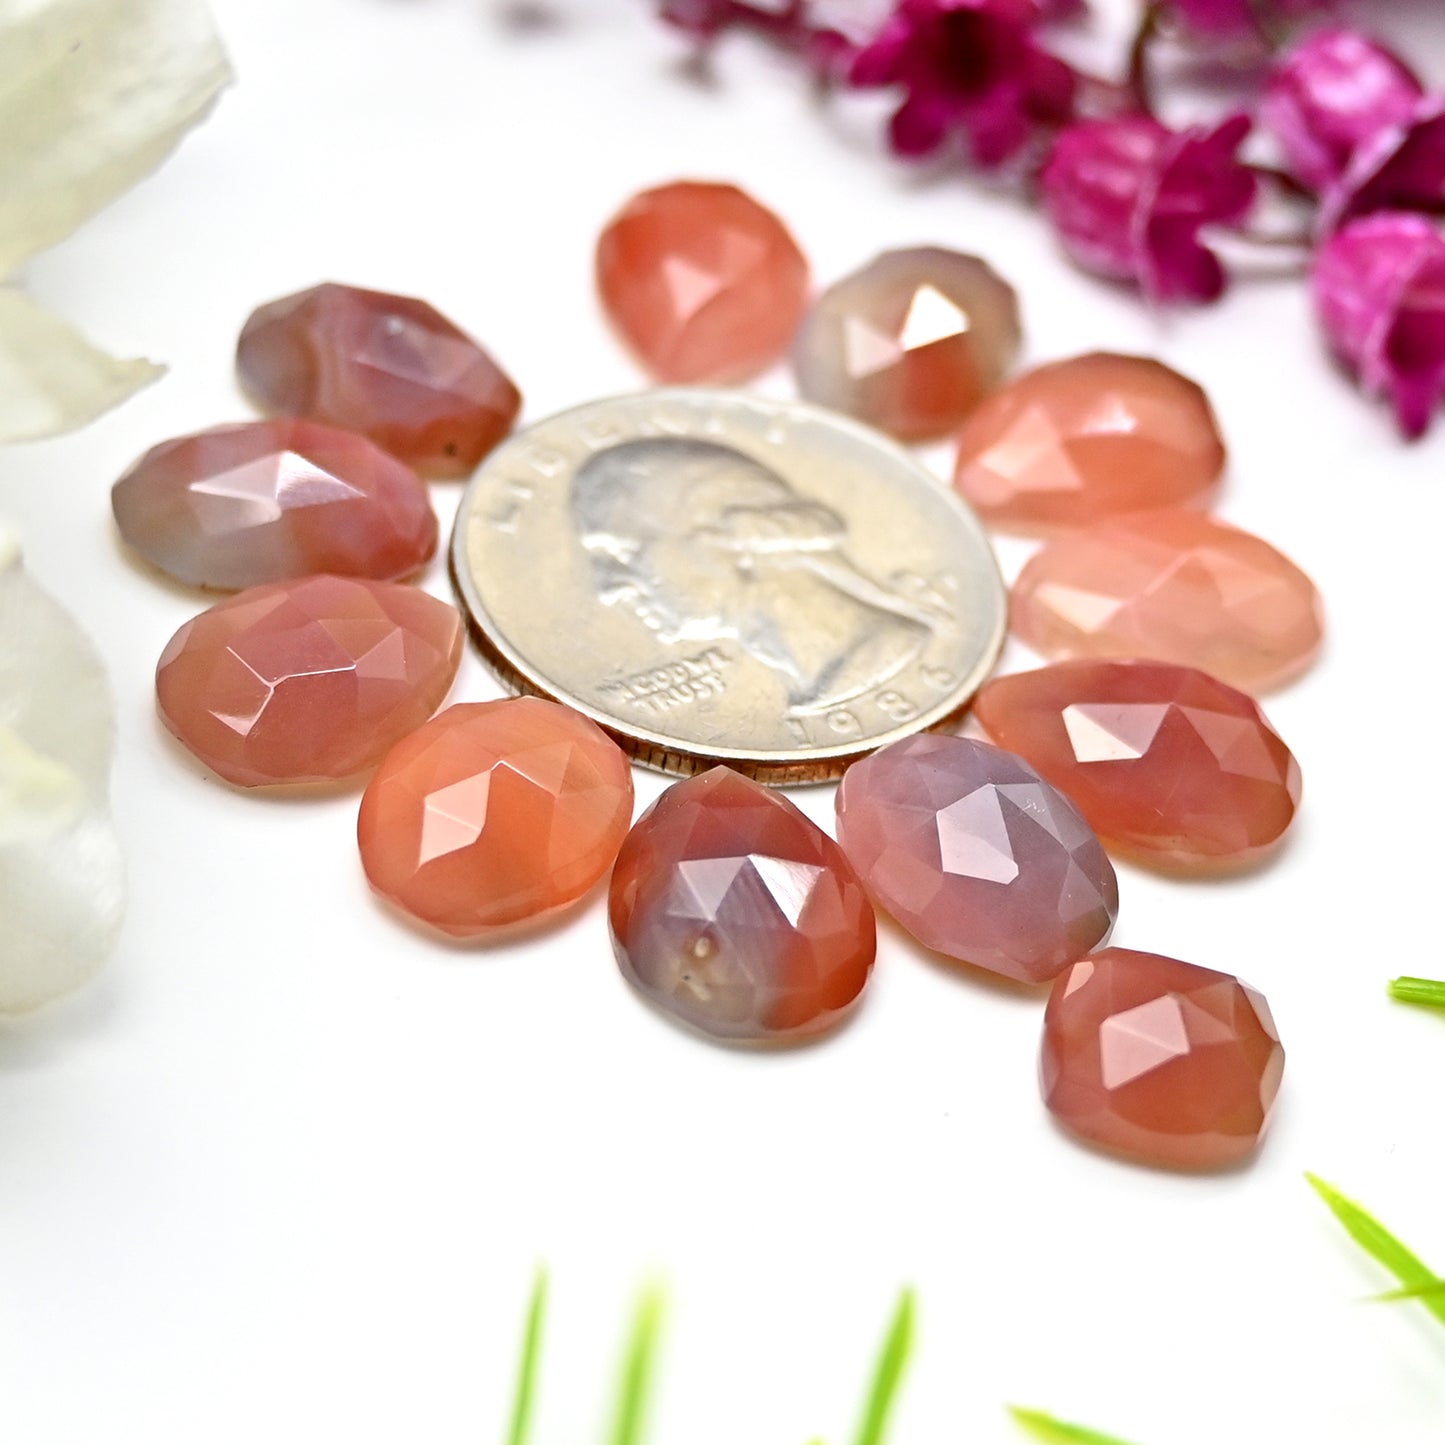 Calibrated Natural Botswana Agate Faceted Rose Cut Cabochon 11x14mm - 10x13mm